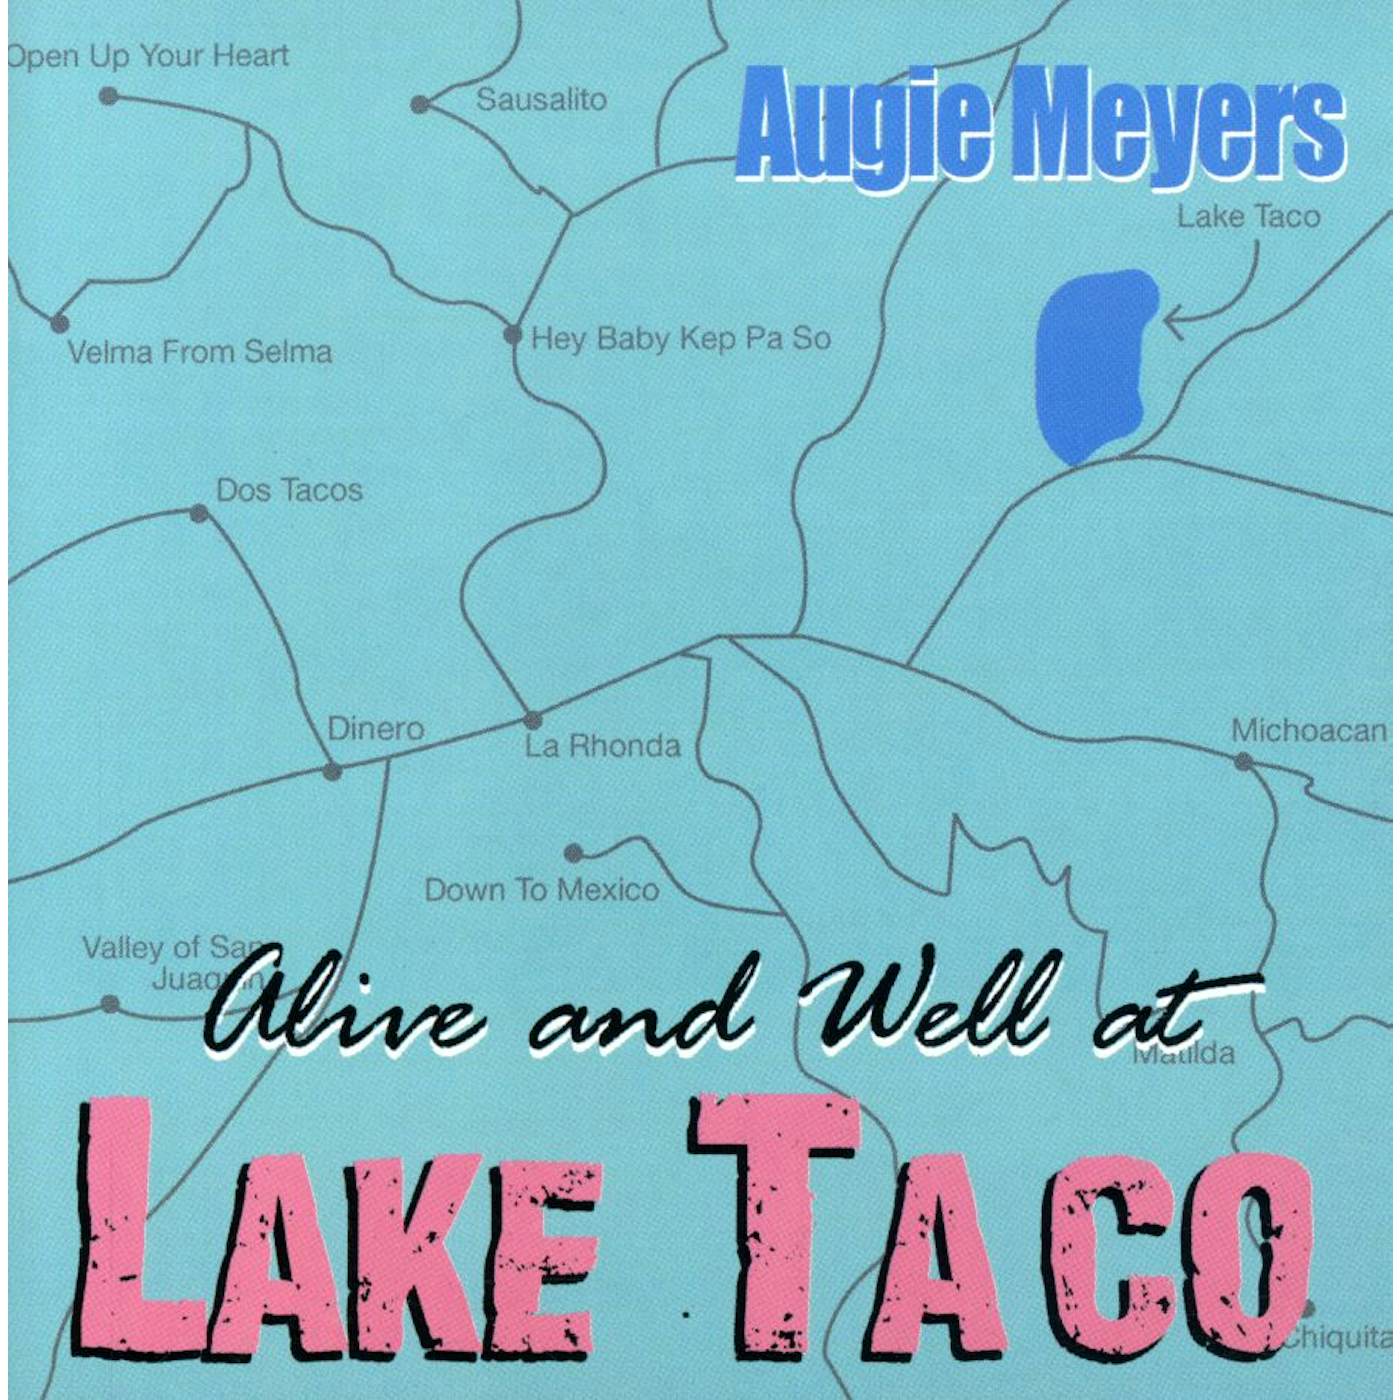 Augie Meyers ALIVE & WELL AT LAKE TACO CD